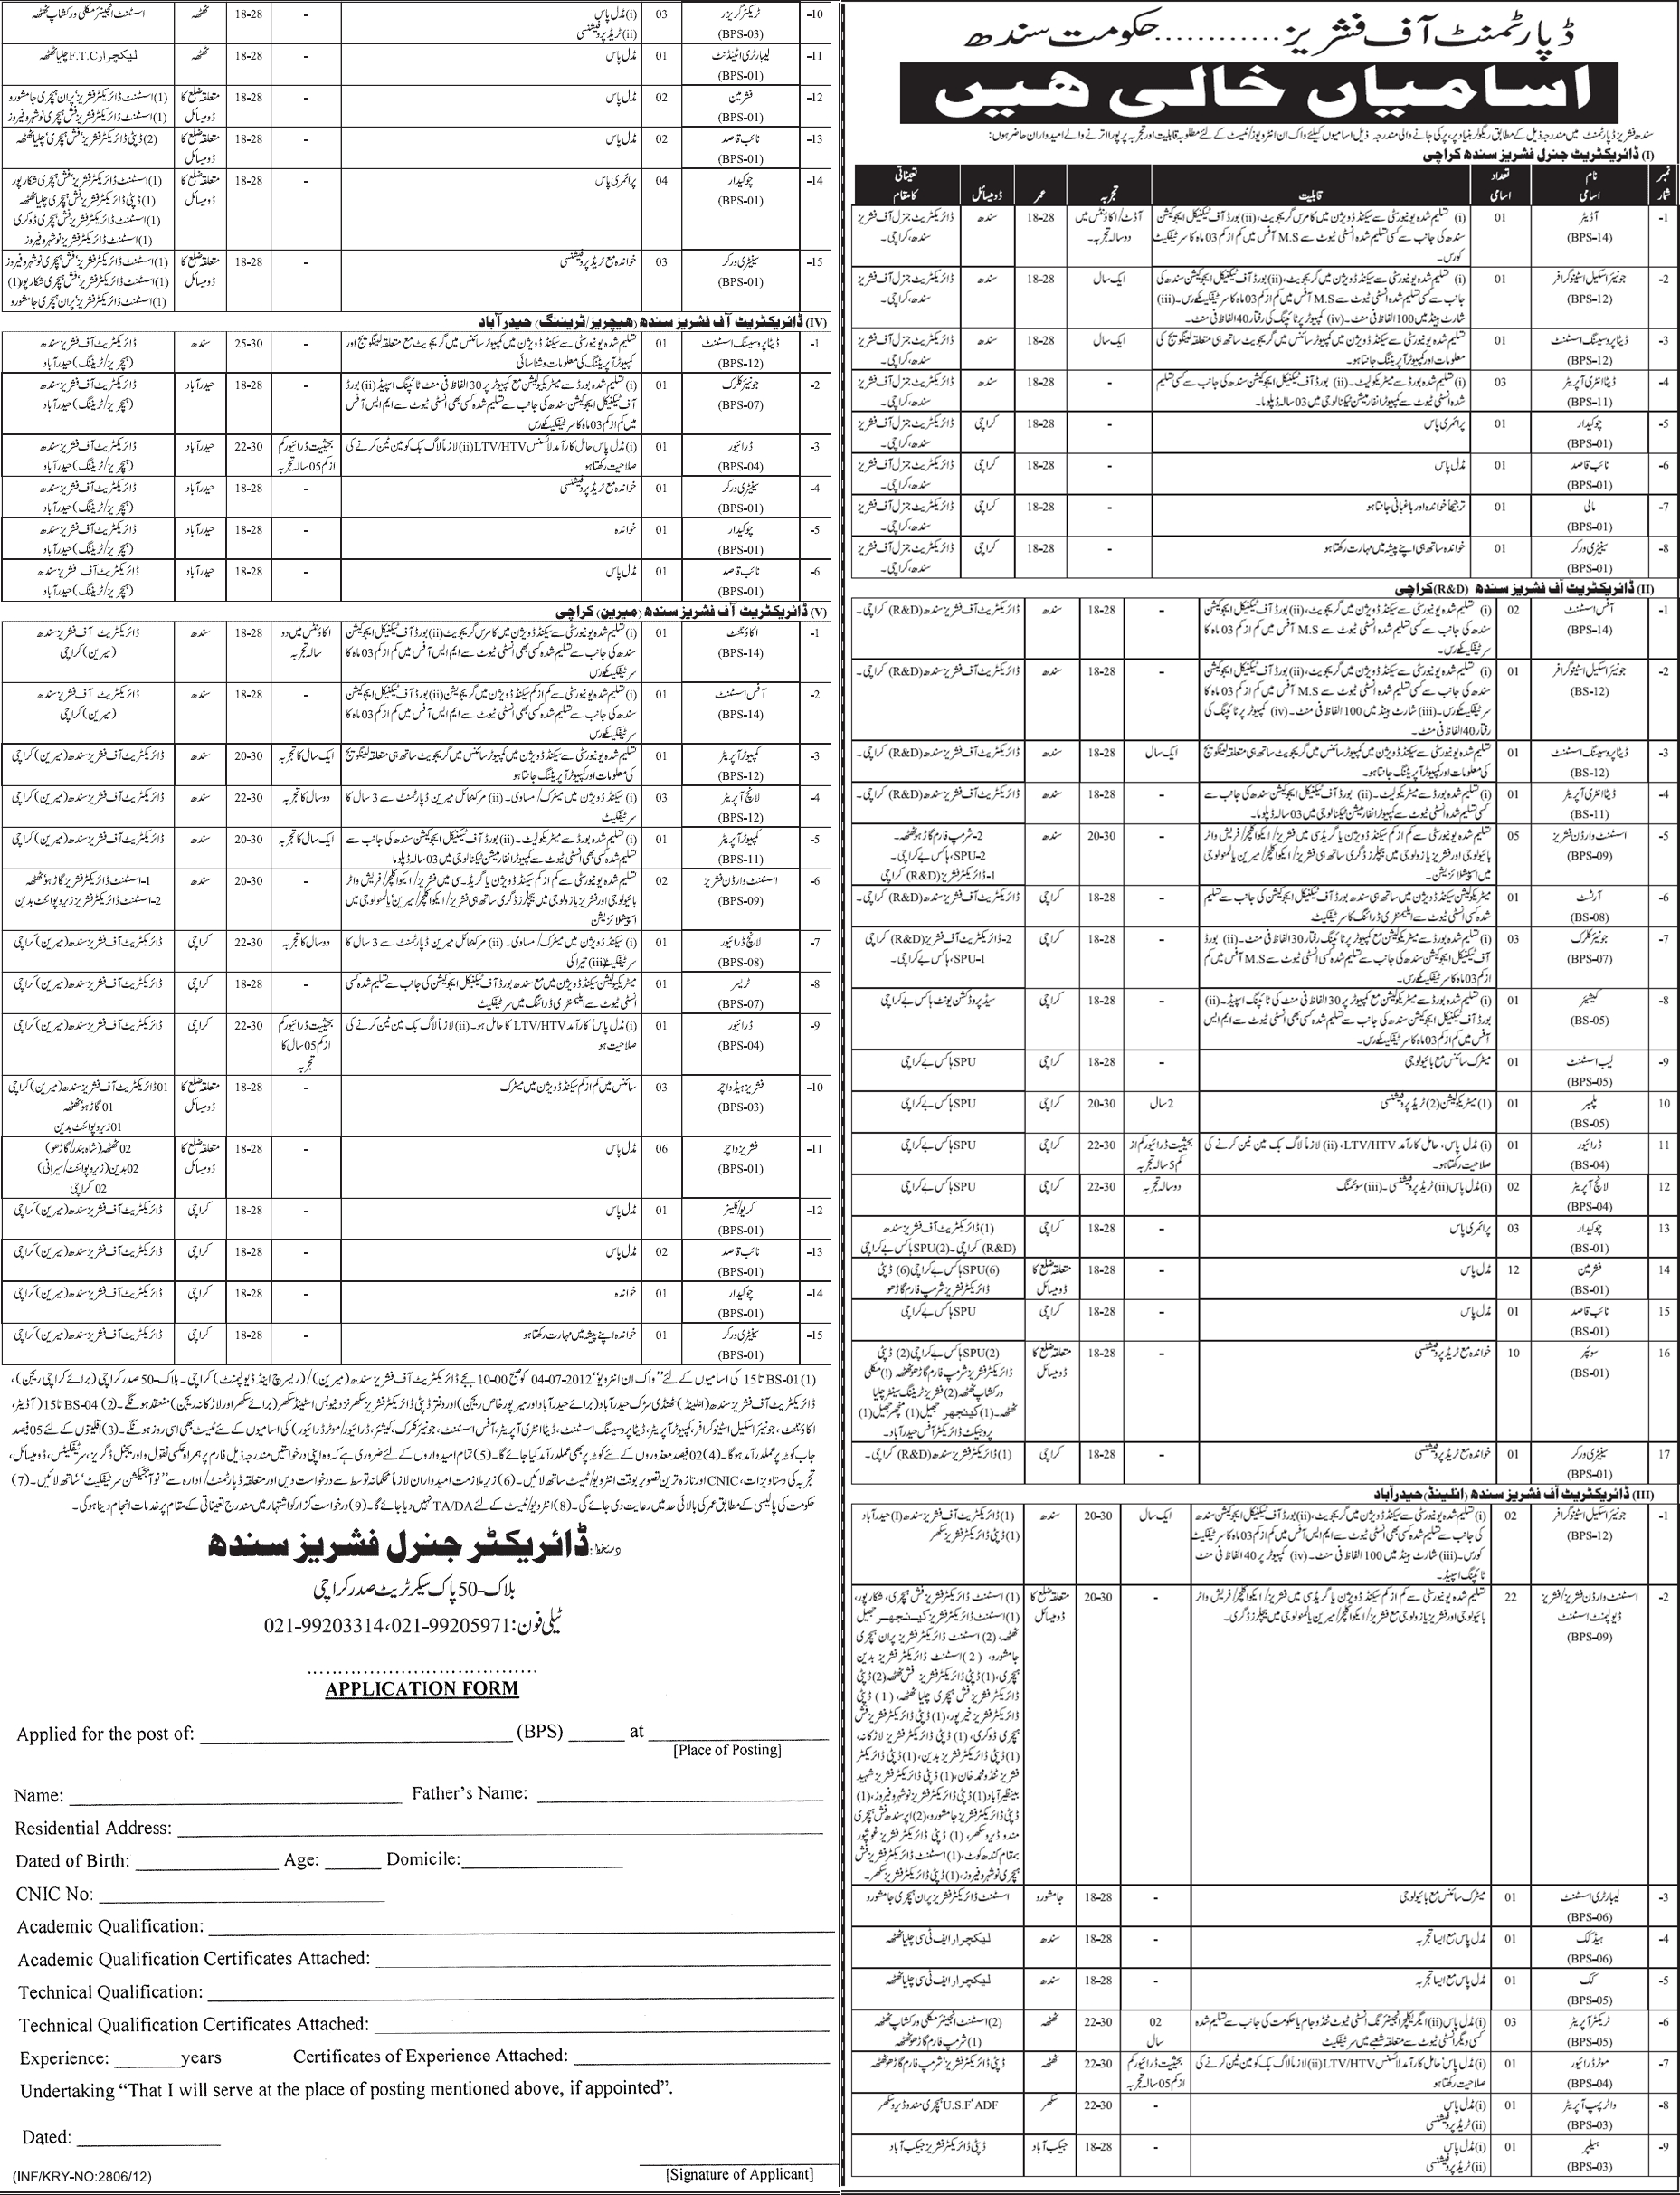 Department of Fisheries (Government of Sindh Jobs) (Govt. job)